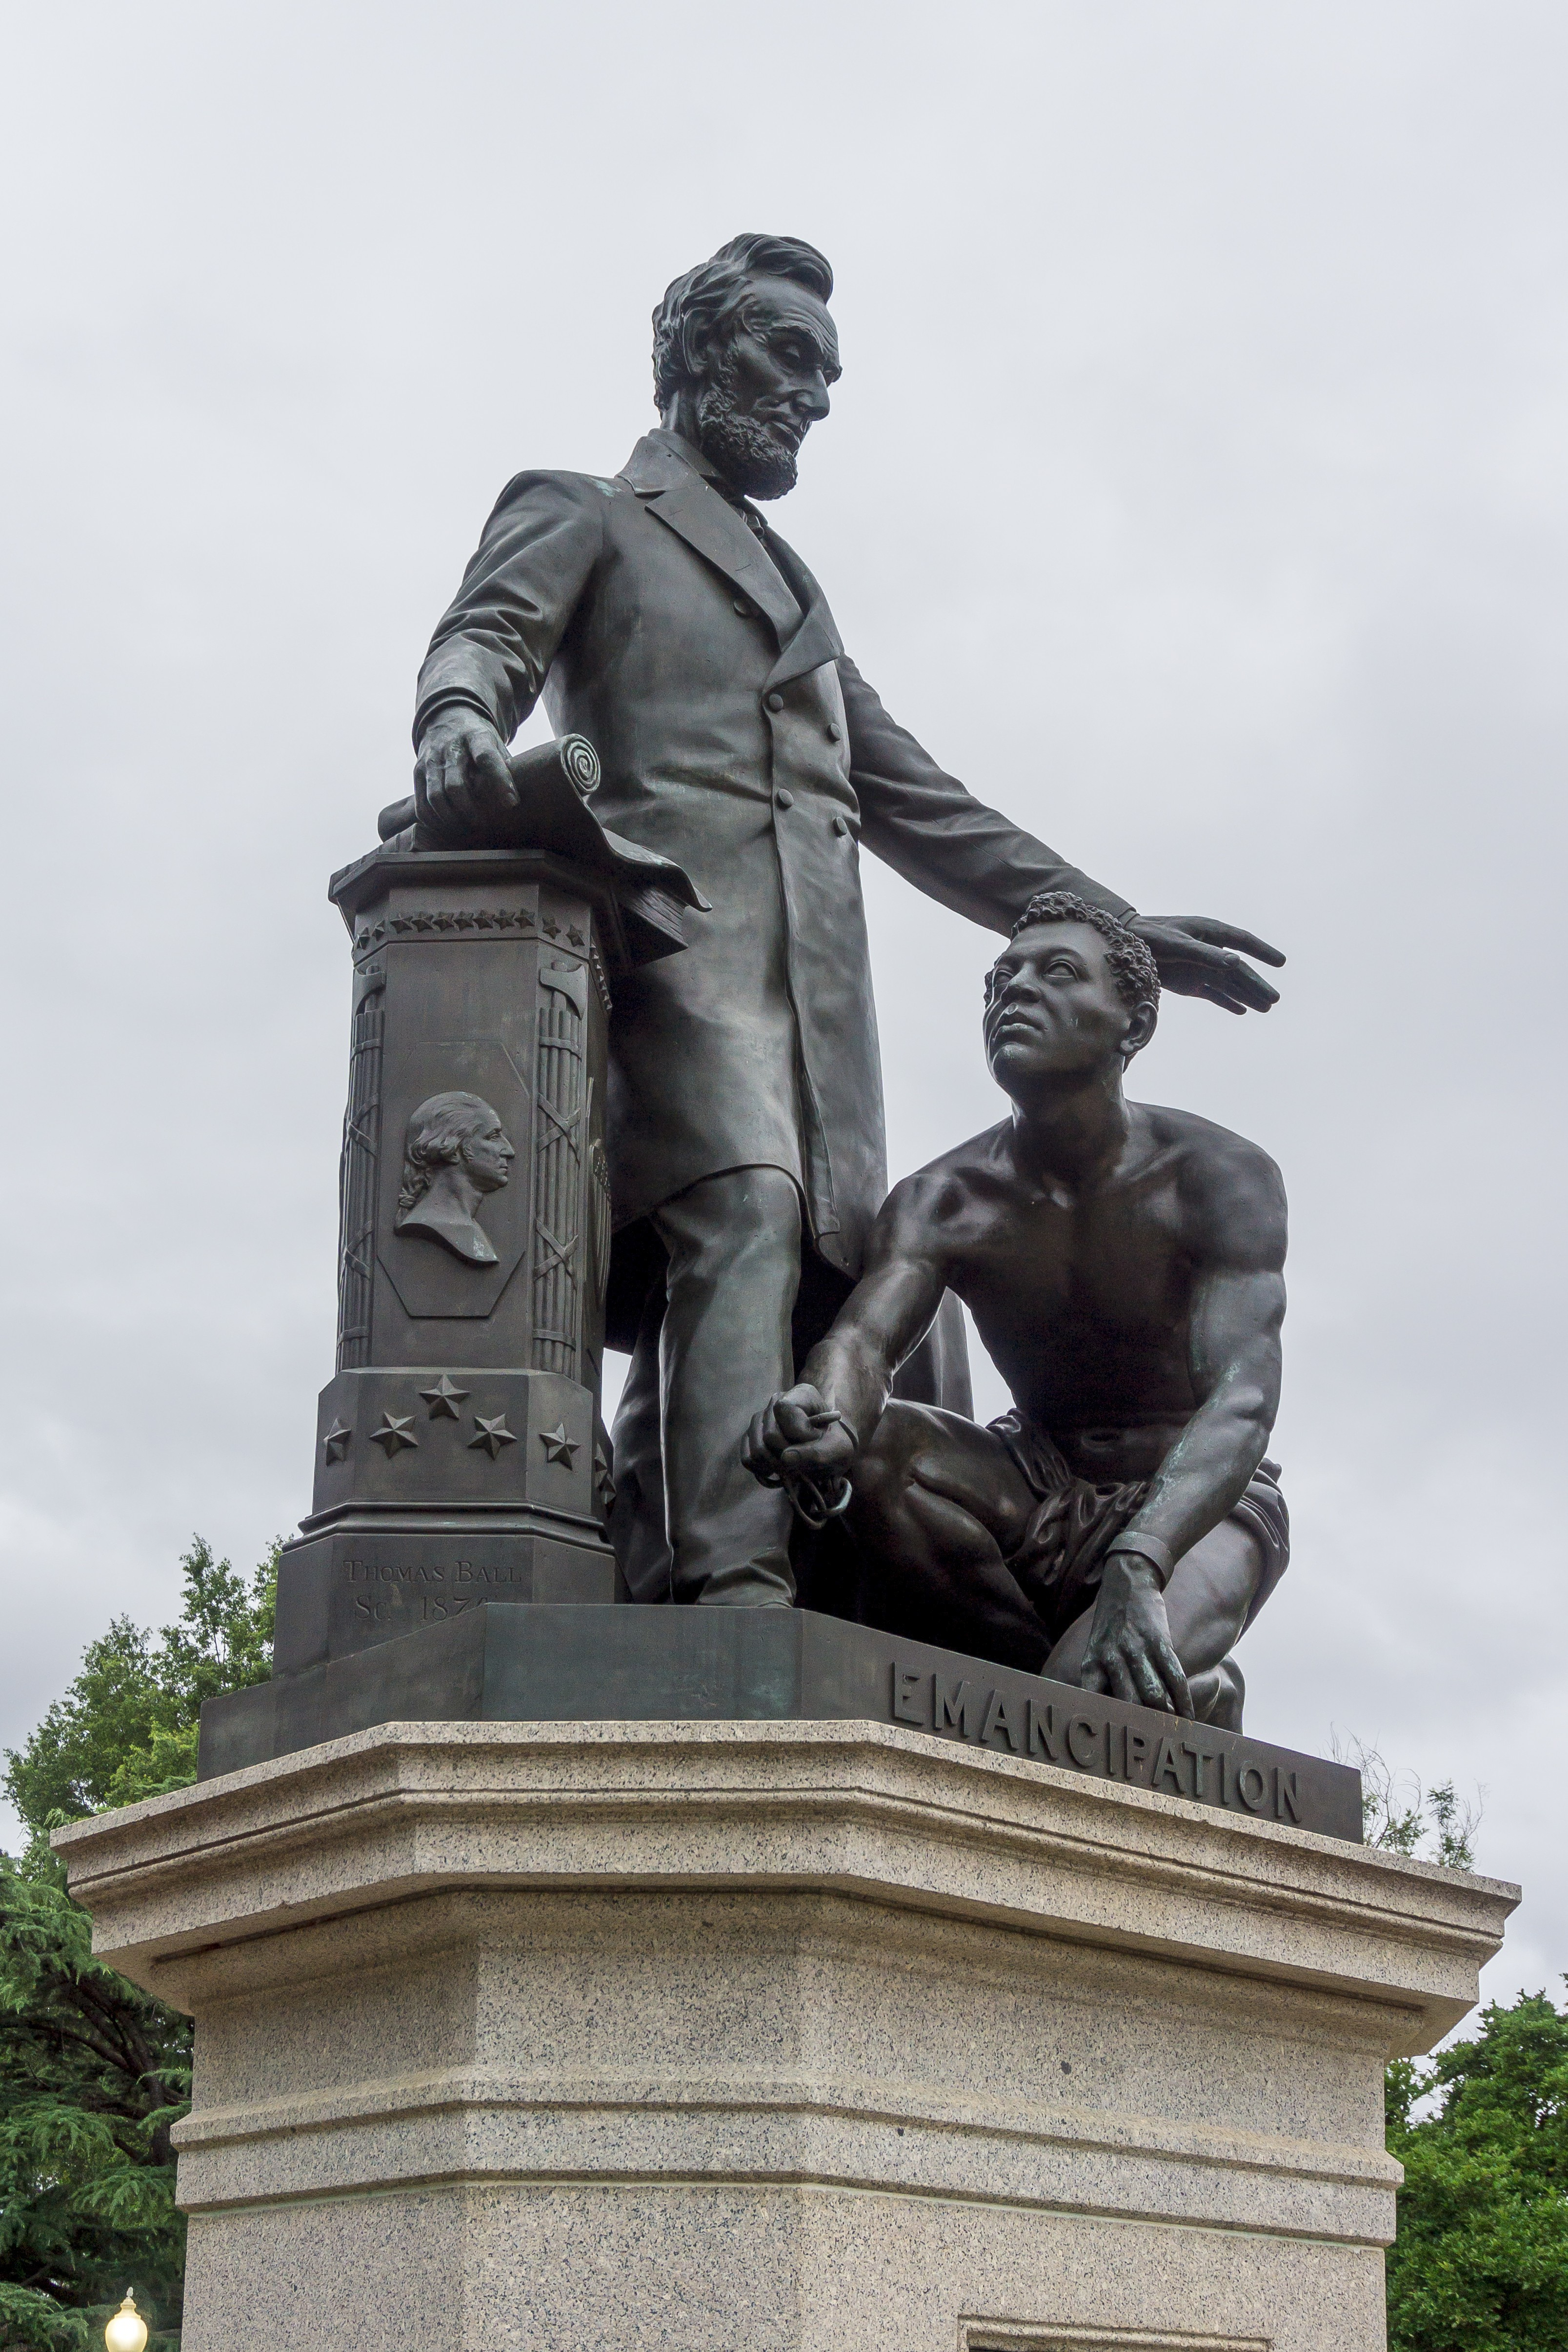 Washington, DC / USA - June 17, 2020: A statue of President Lincoln standing over a freed black slave is the latest statue that is the subject of community action to remove it.